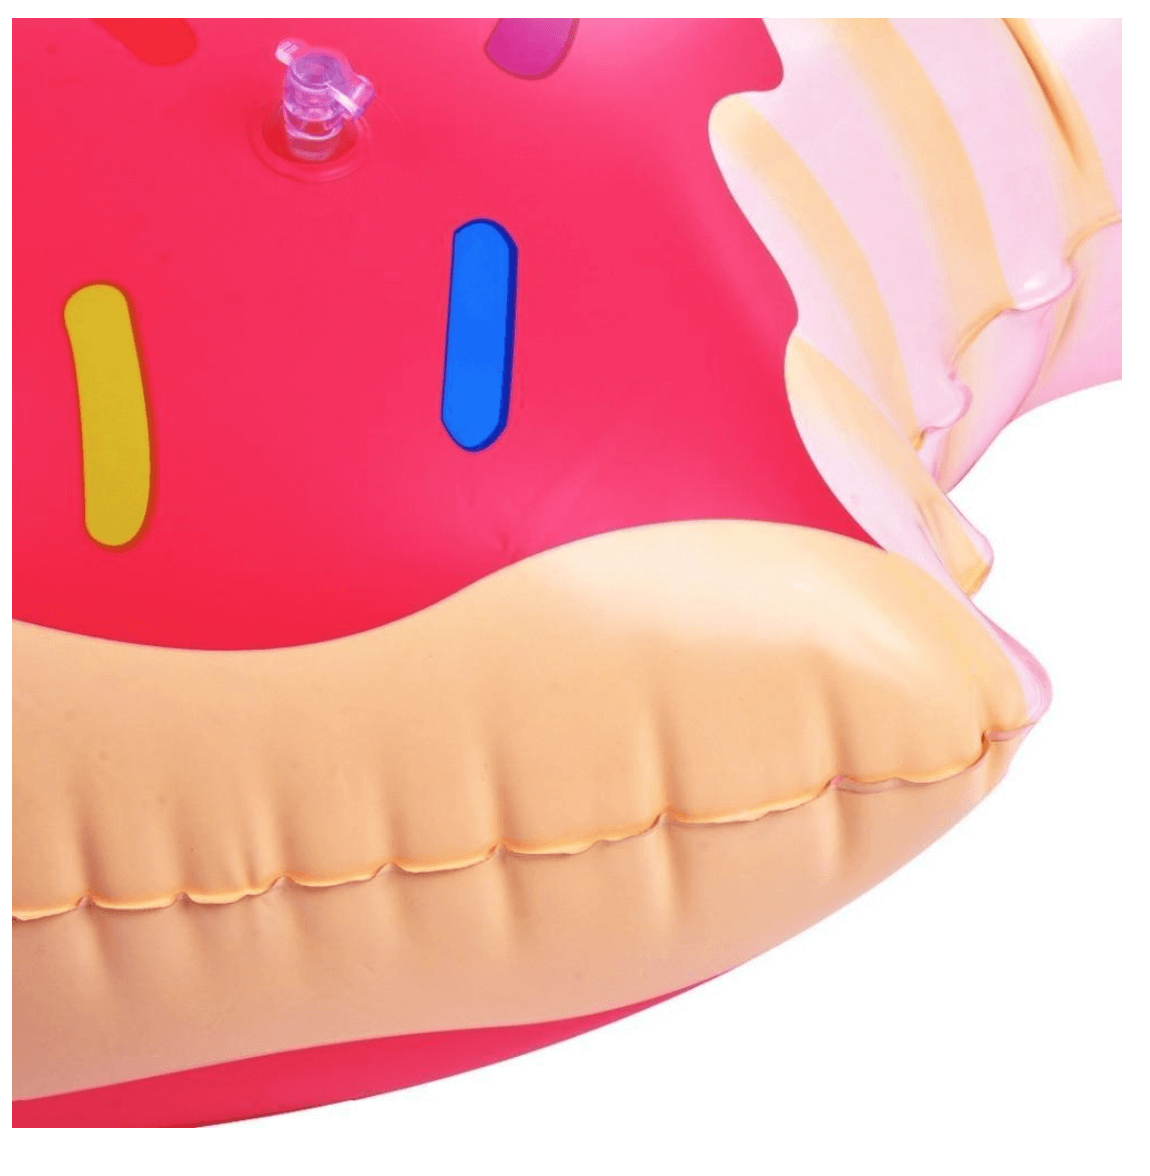 Donut Inflatable Swimming Ring Adult Super Large Gigantic Doughnut Kids Children Summer Party Pool Toys Life Buoy Seat Float